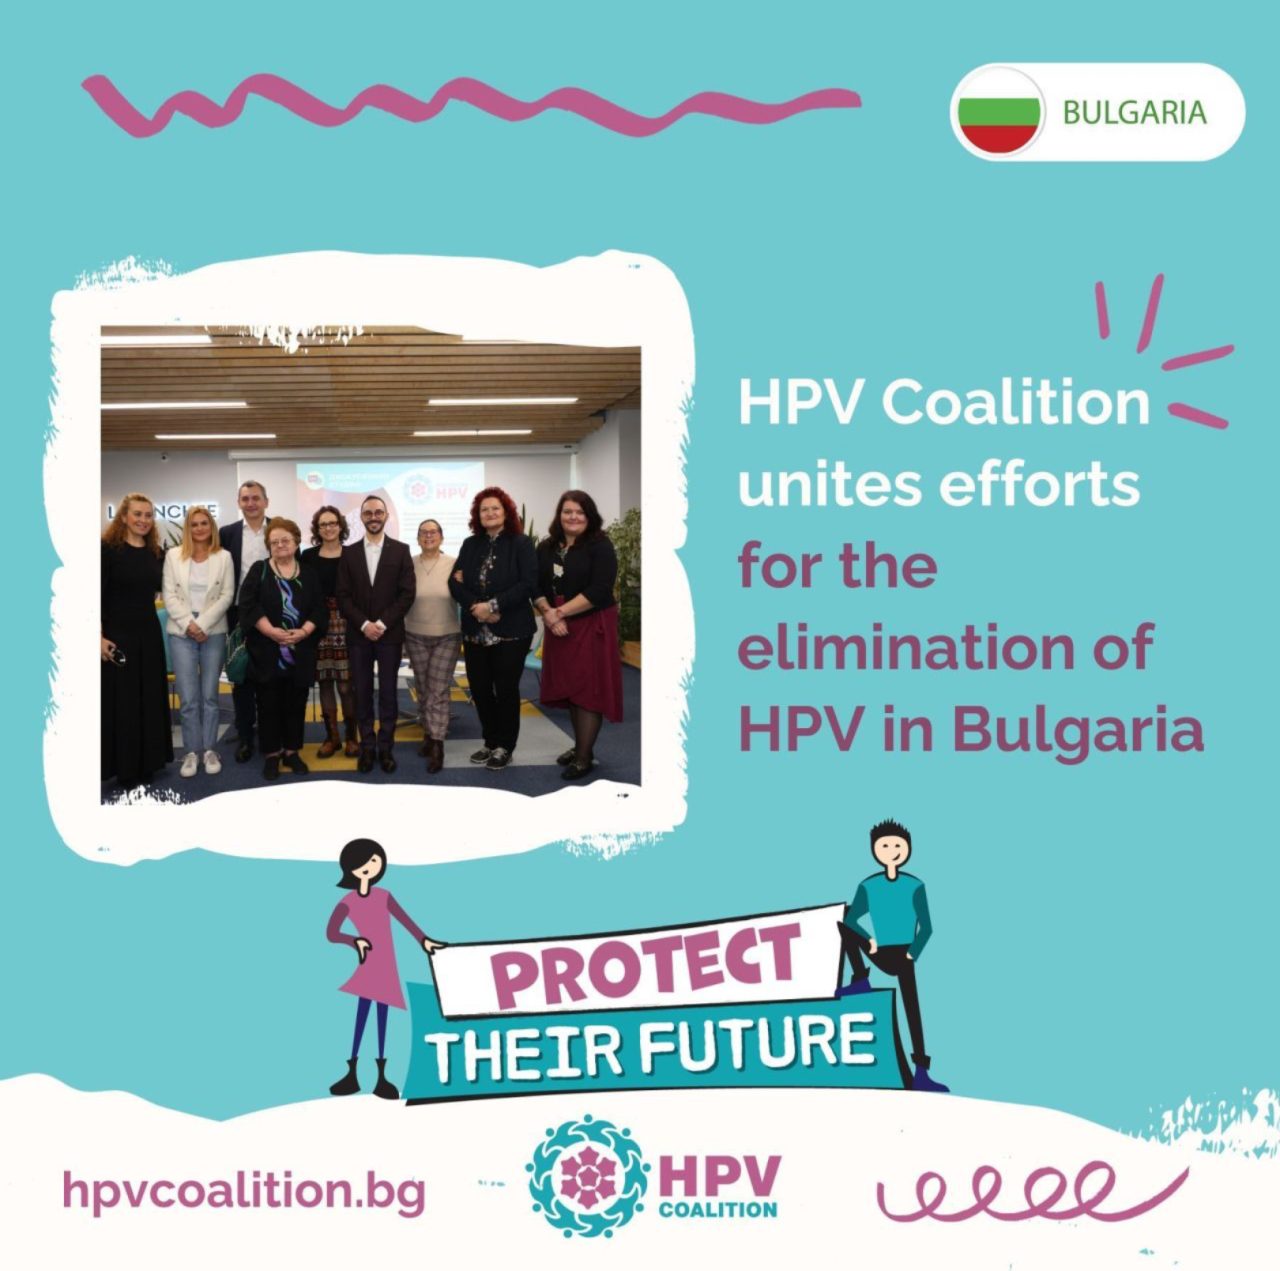 Today in Bulgaria, the ECO HPV Action project is partnering with Fairy Tales Mailbox. – European Cancer Organisation